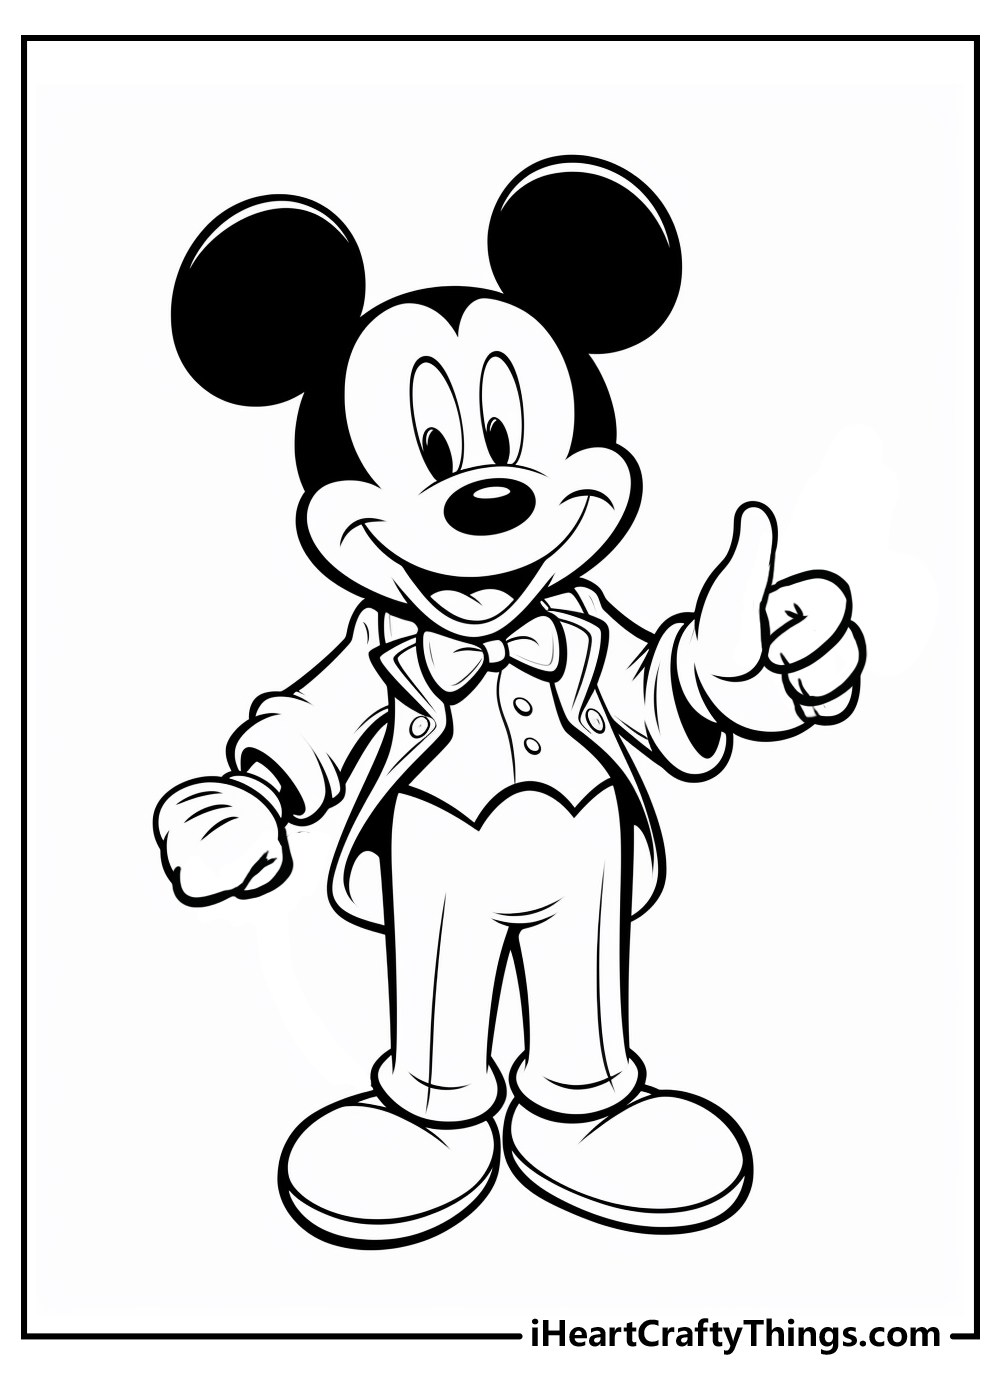 mickey mouse coloring sheet free download